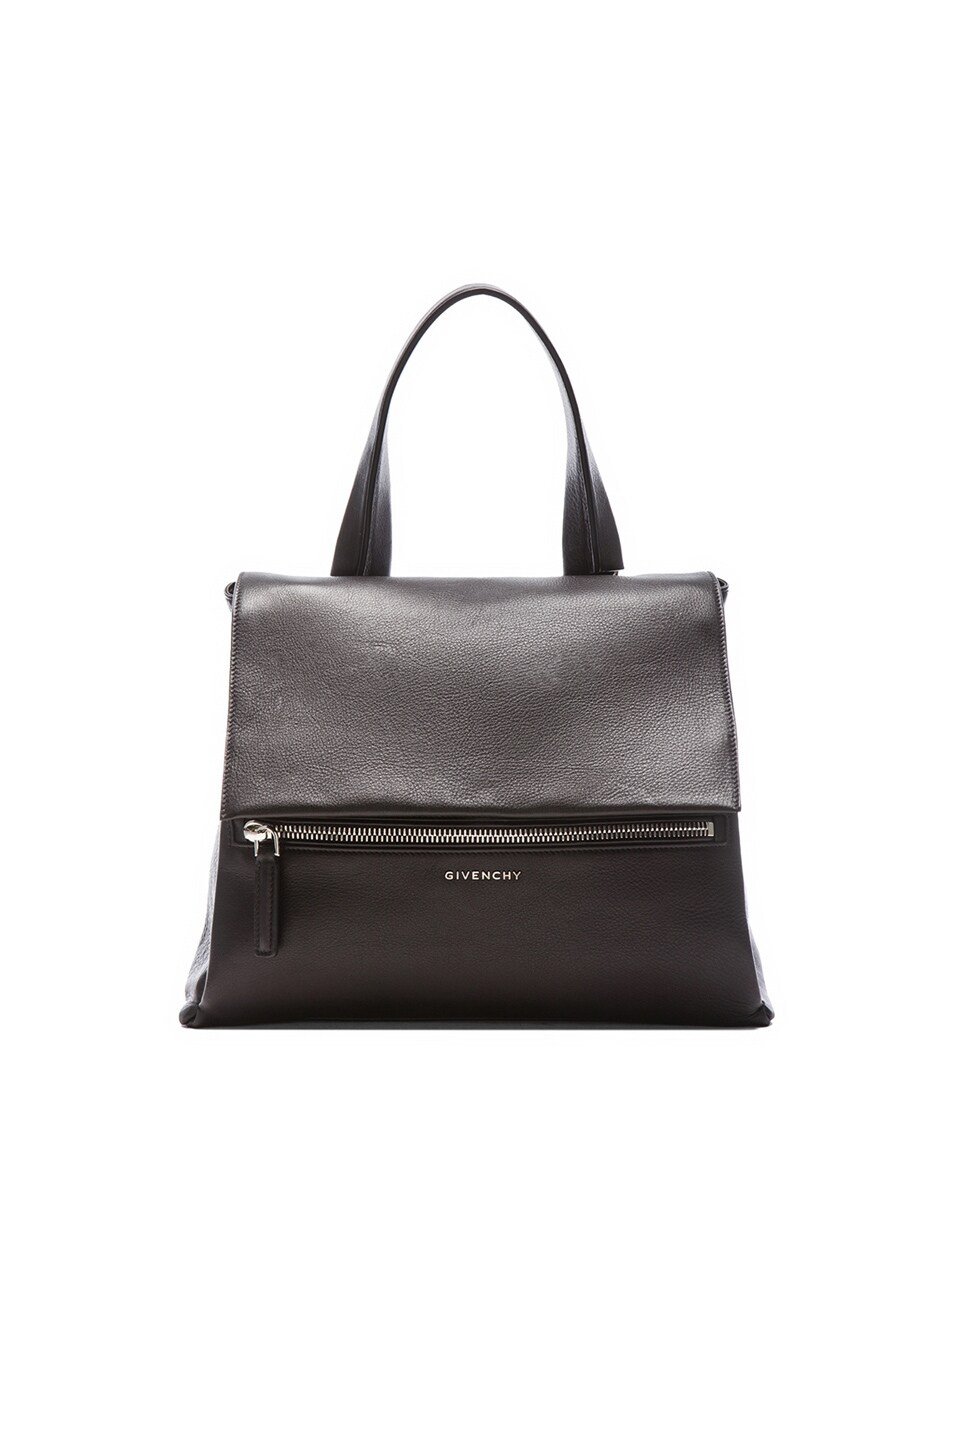 Image 1 of Givenchy Waxy Leather Medium Pandora Pure Flap Bag in Black